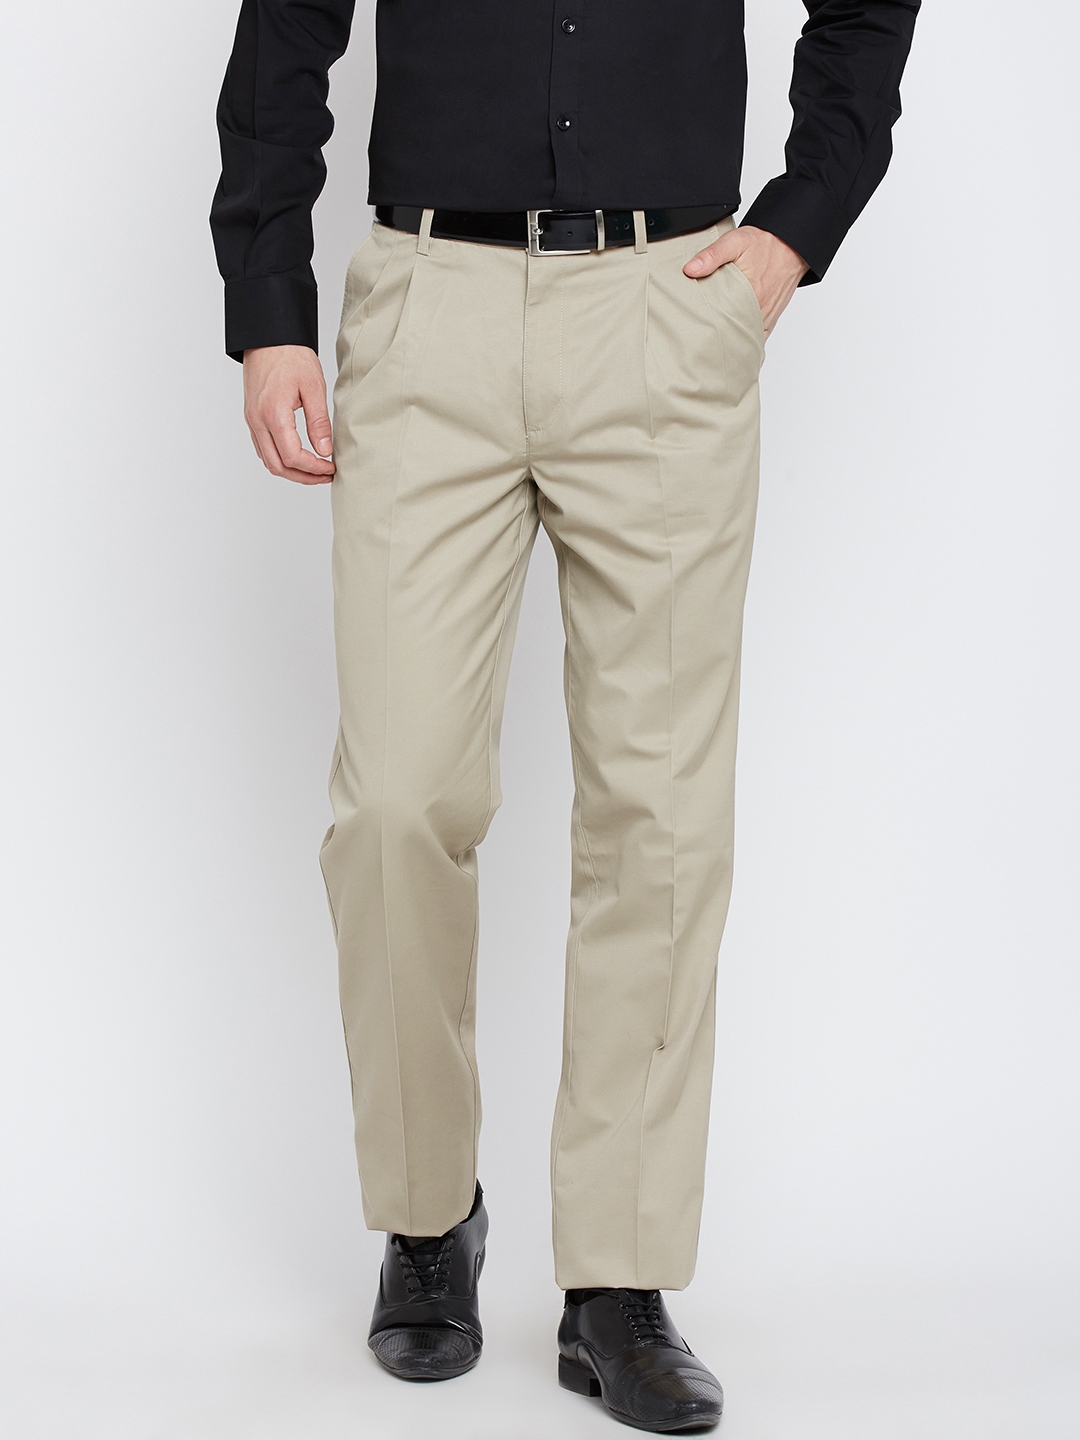 Buy Blue Trousers  Pants for Men by Wills Lifestyle Online  Ajiocom